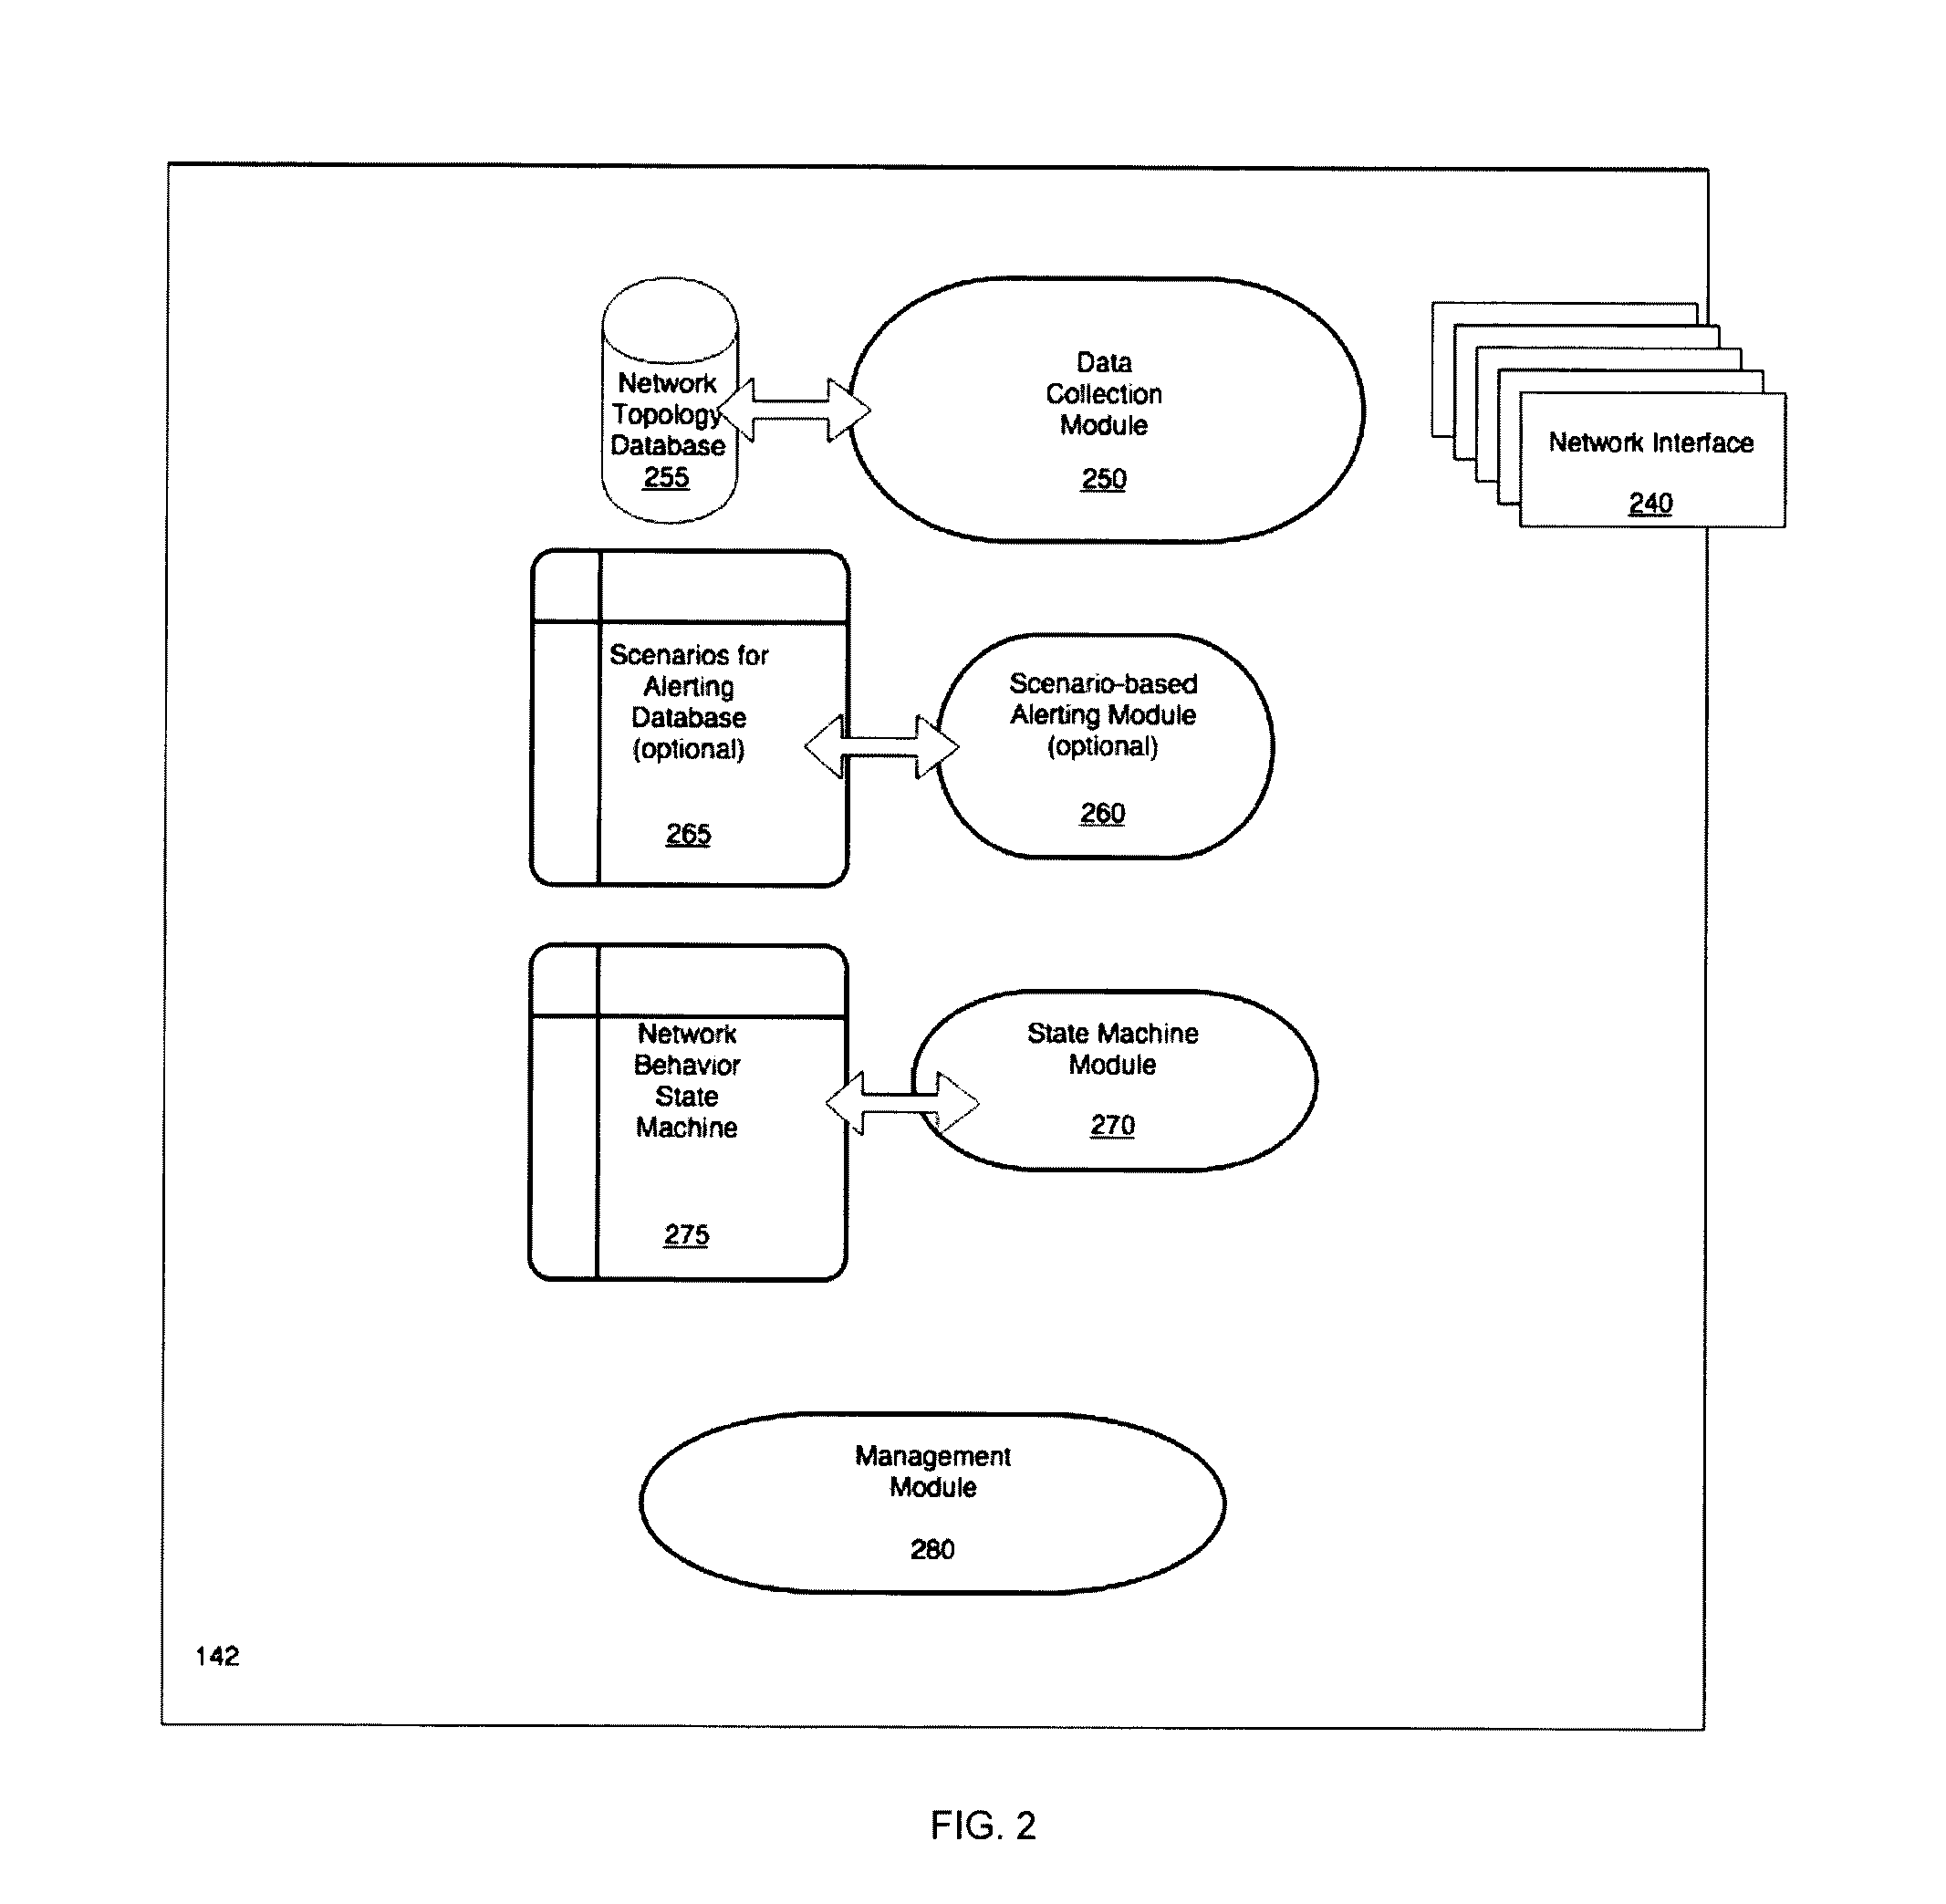 Method for mitigation of cyber attacks on industrial control systems